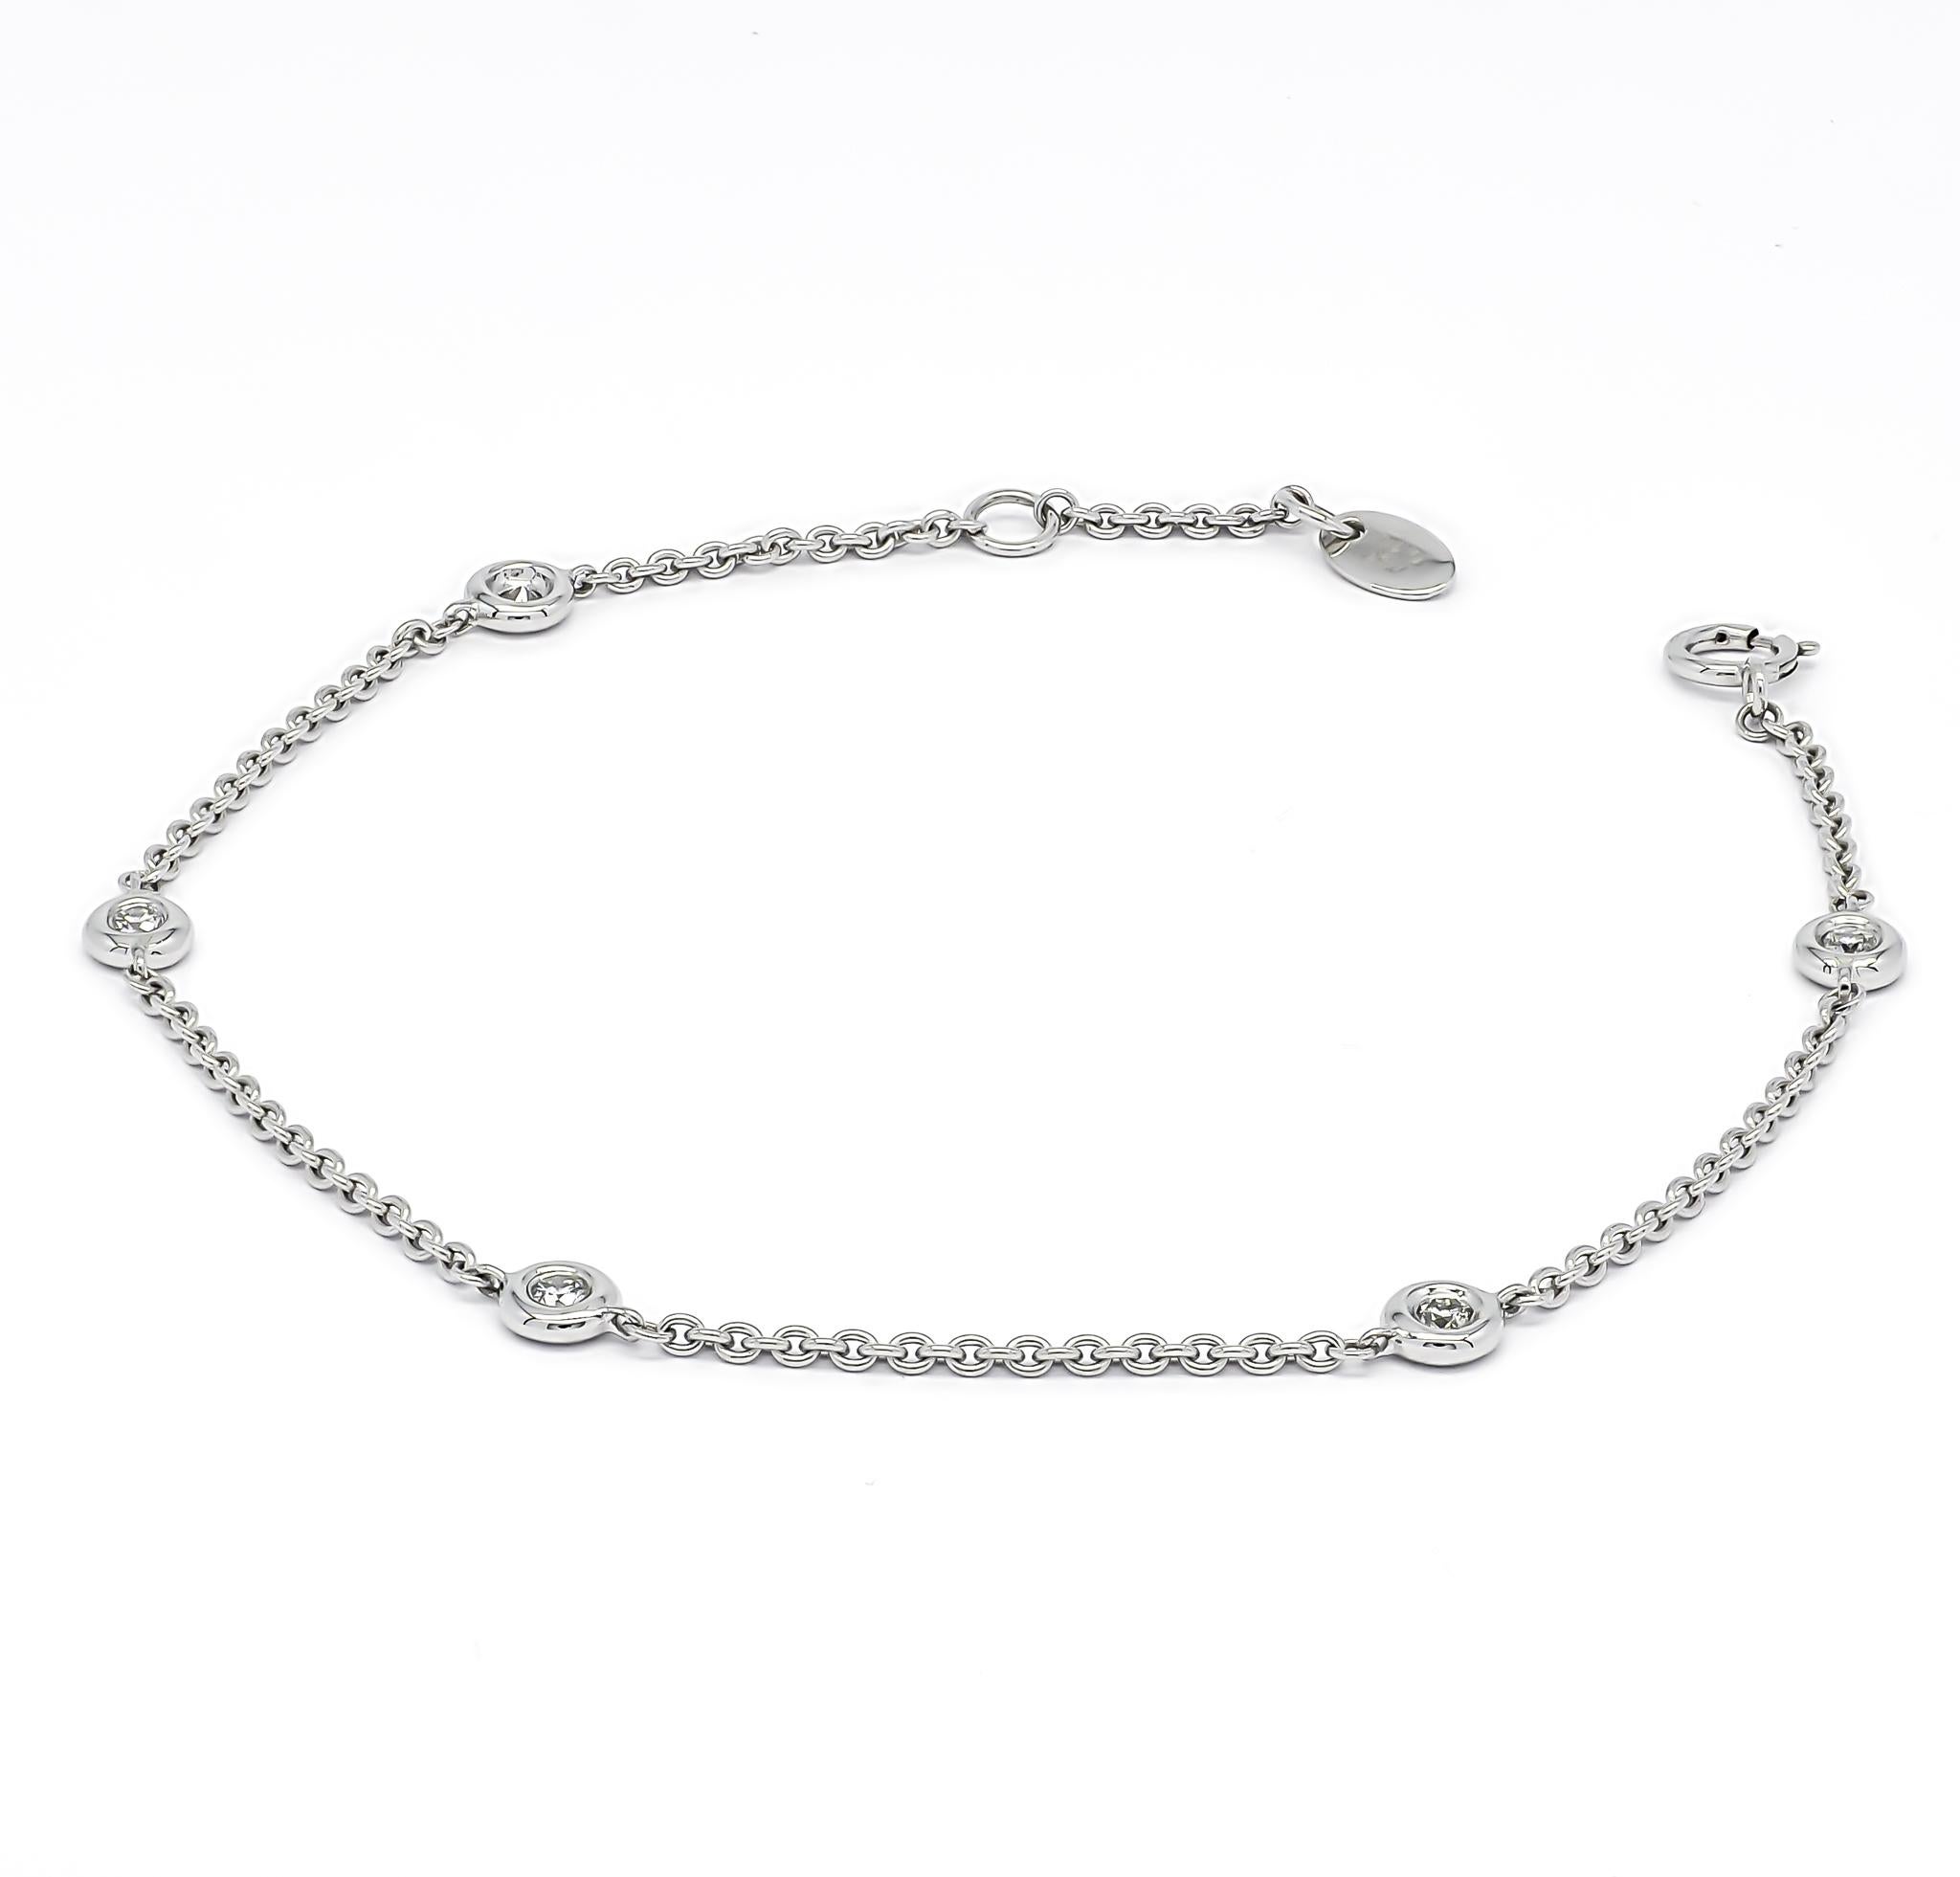 Immerse yourself in the delicate beauty of this exquisite bracelet, artfully crafted in 18k white gold. The bracelet showcases a captivating display of soft shimmering chain links, gorgeously enhanced by round-shape diamonds meticulously set in